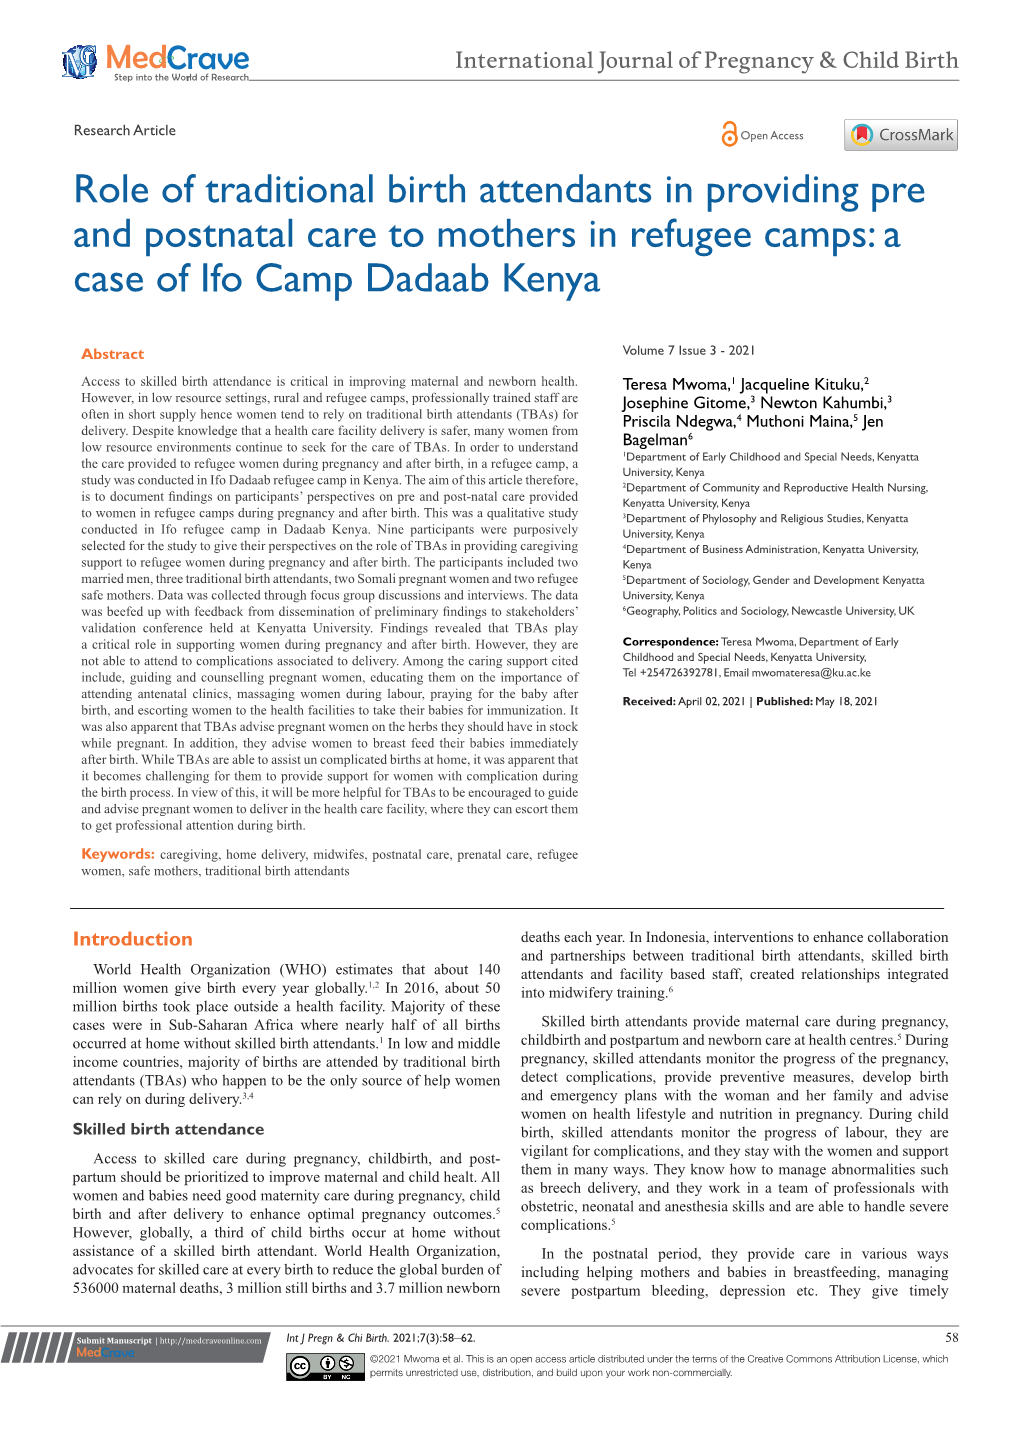 Role of Traditional Birth Attendants in Providing Pre and Postnatal Care to Mothers in Refugee Camps: a Case of Ifo Camp Dadaab Kenya